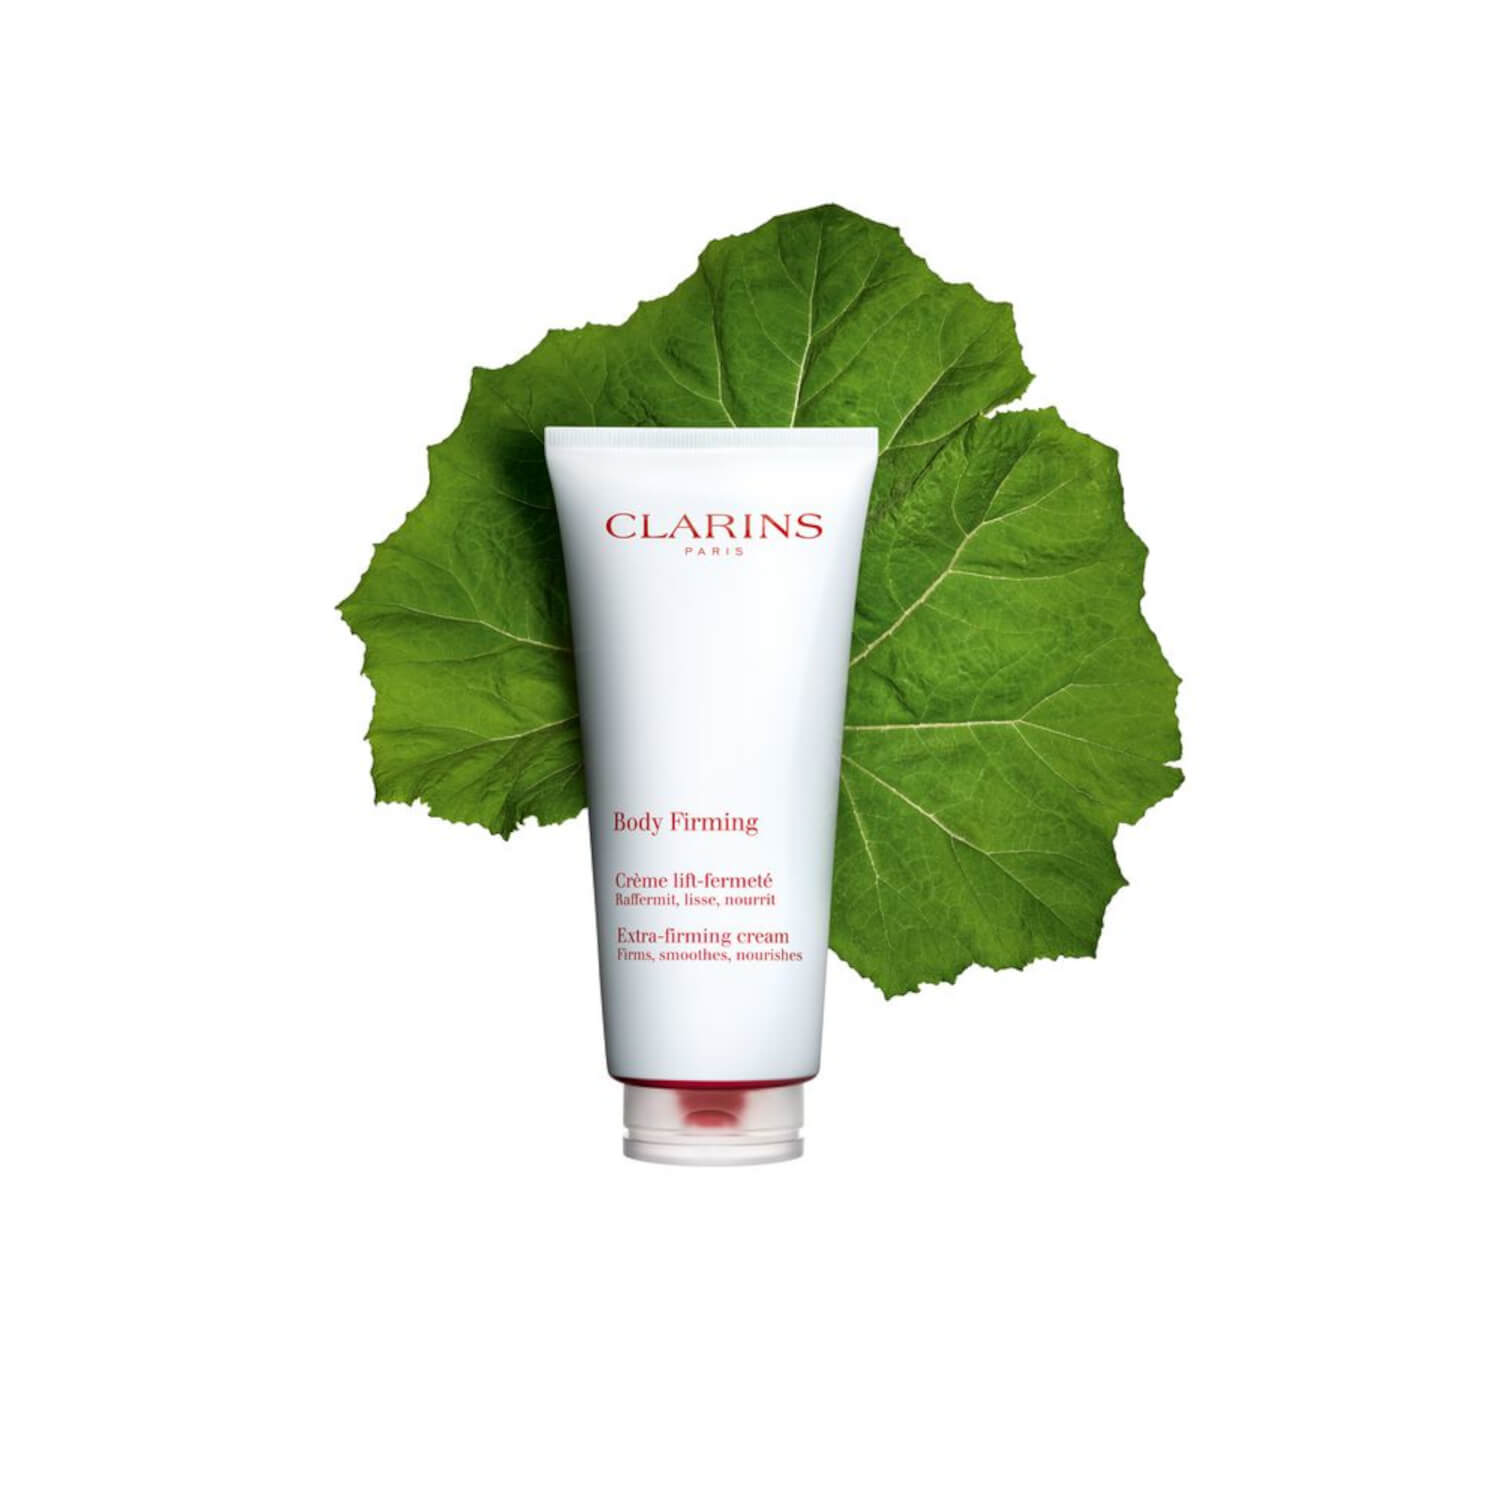 Clarins Body Firming Extra-Firming Cream - 200ml 2 Shaws Department Stores